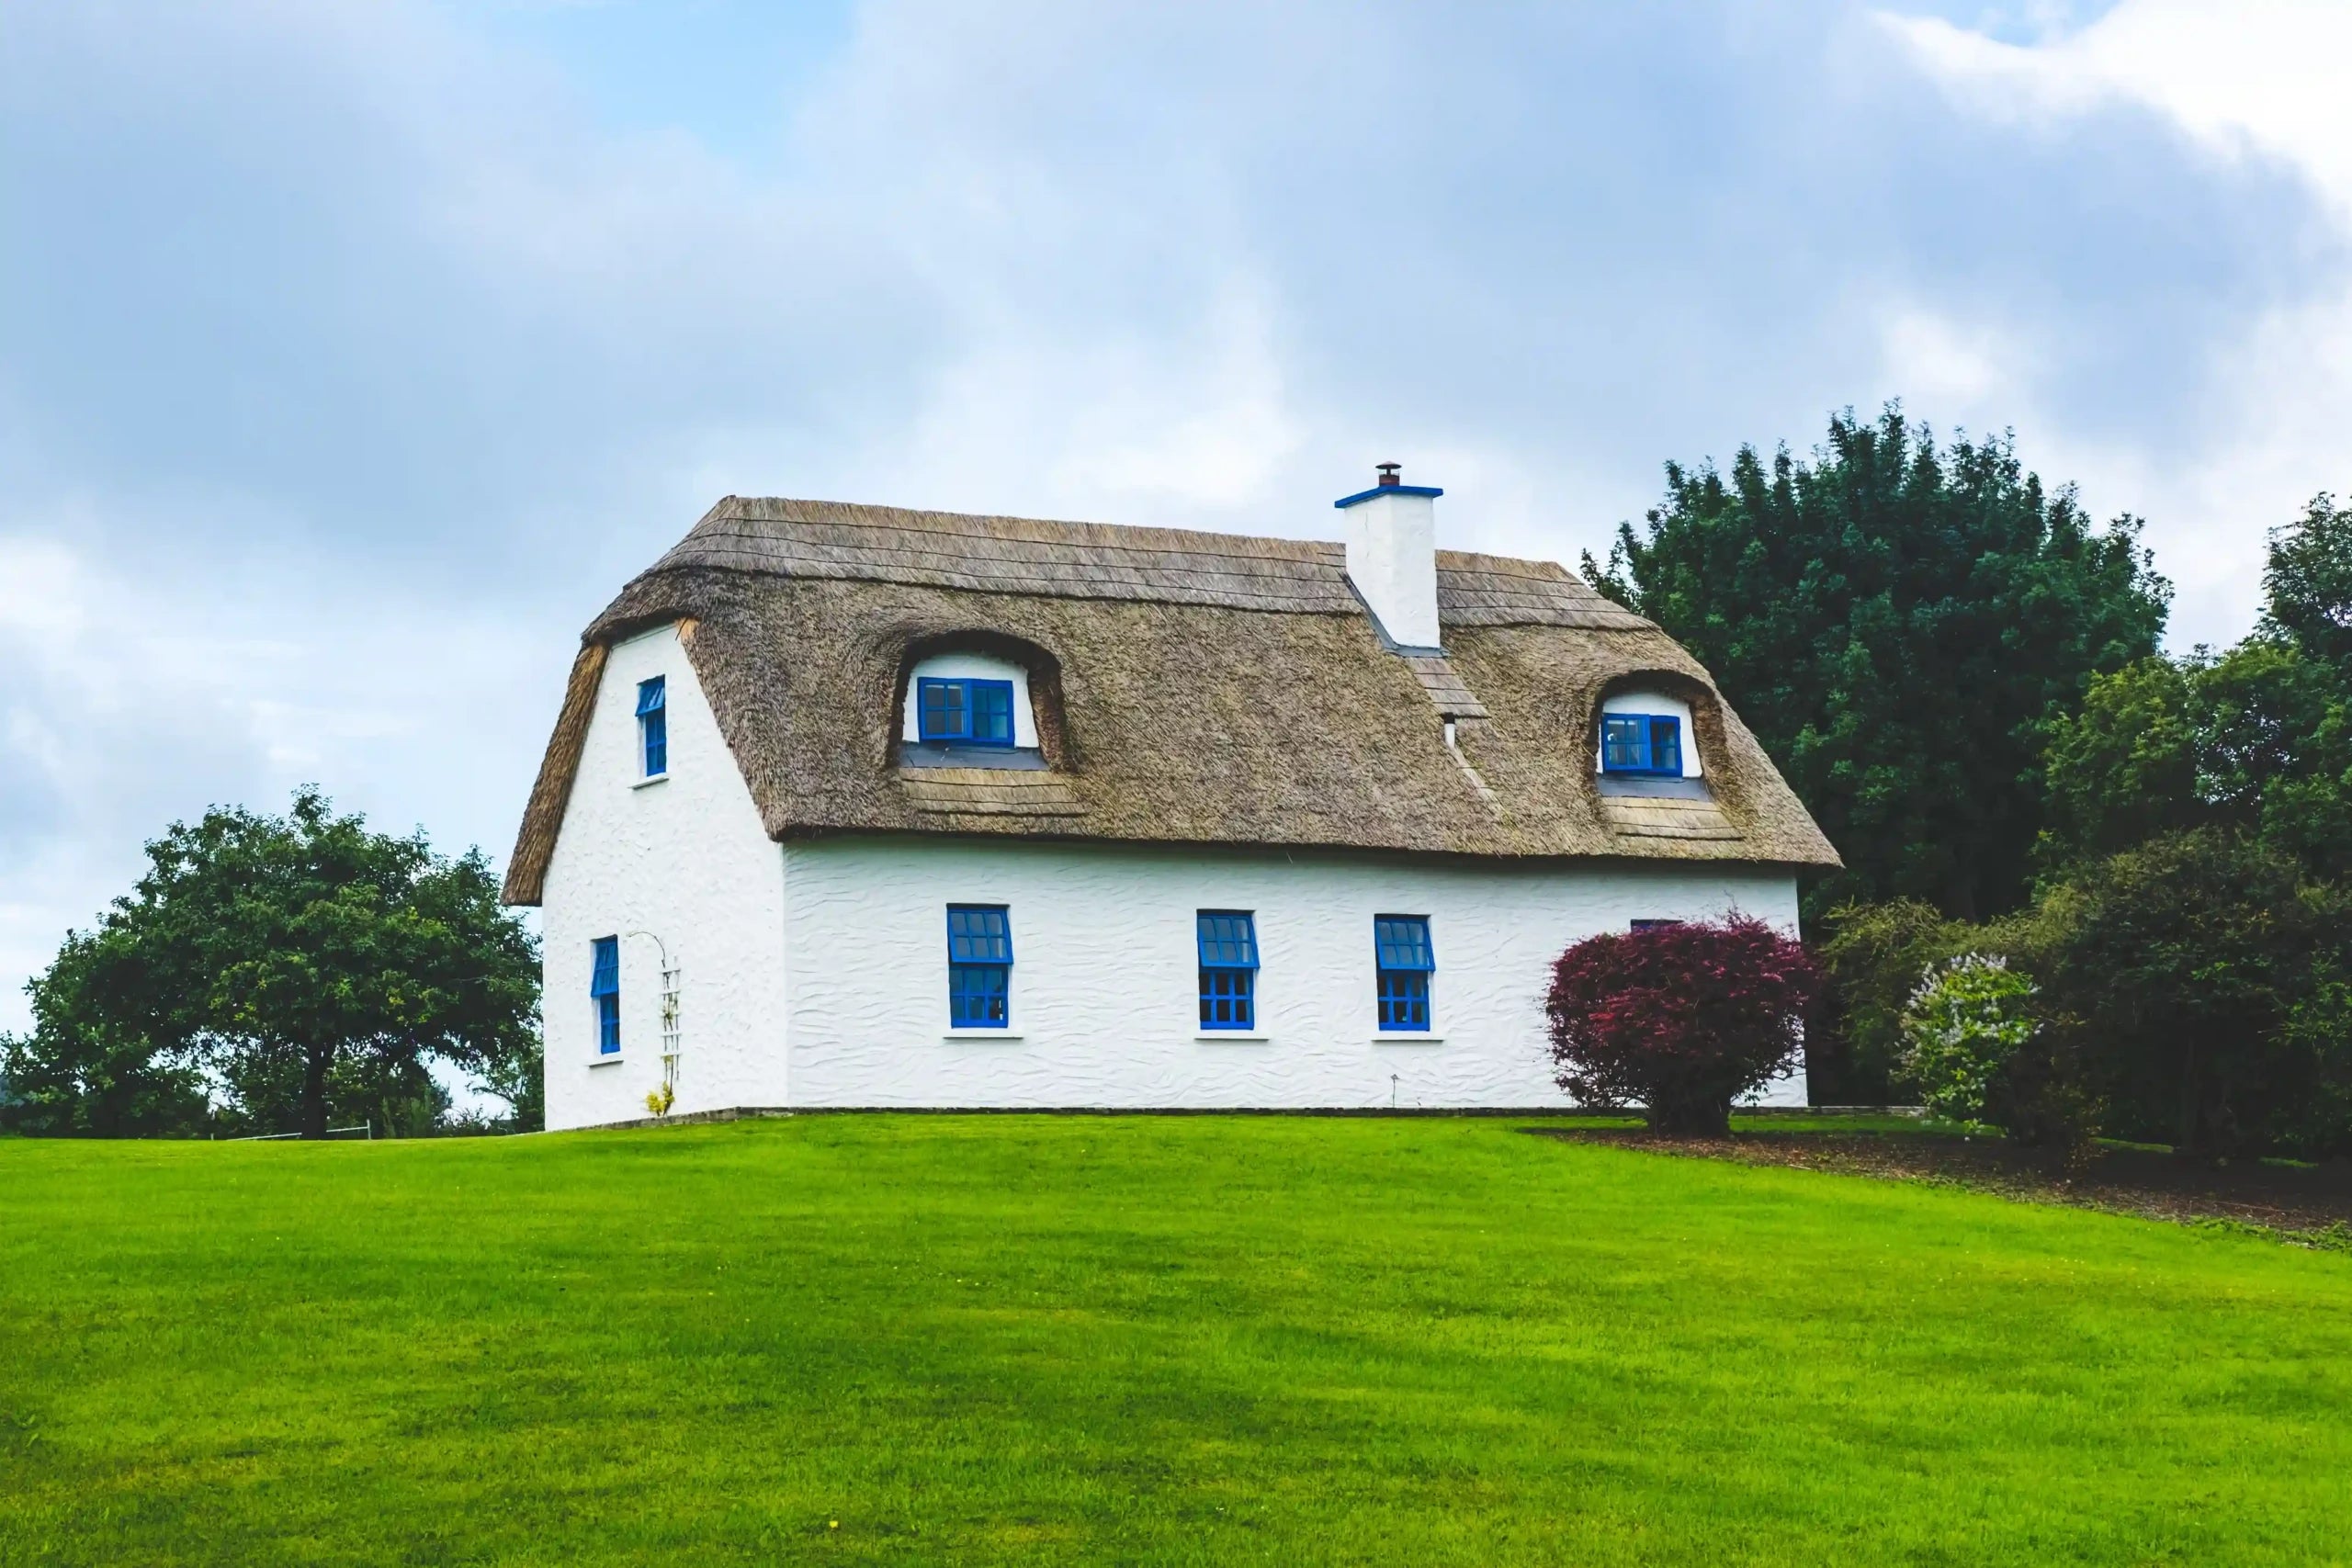 white house with a thatched roof sits nestled amidst a lush green field.